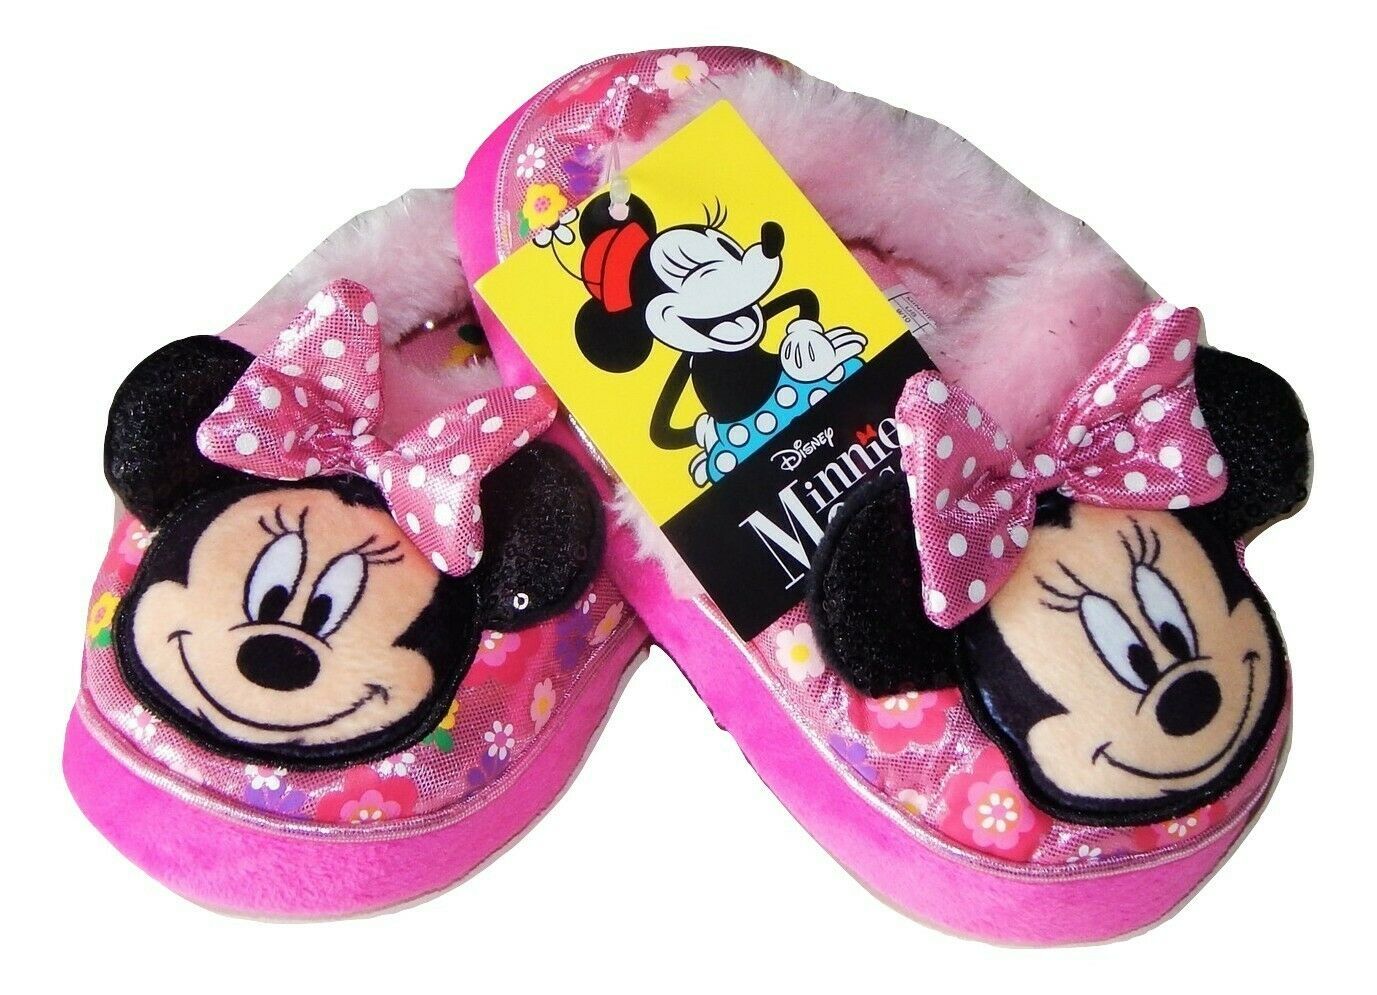 MINNIE MOUSE Plush Slippers w/ Polka Dot Bow NWT Toddler's Size 5-6, 7 ...